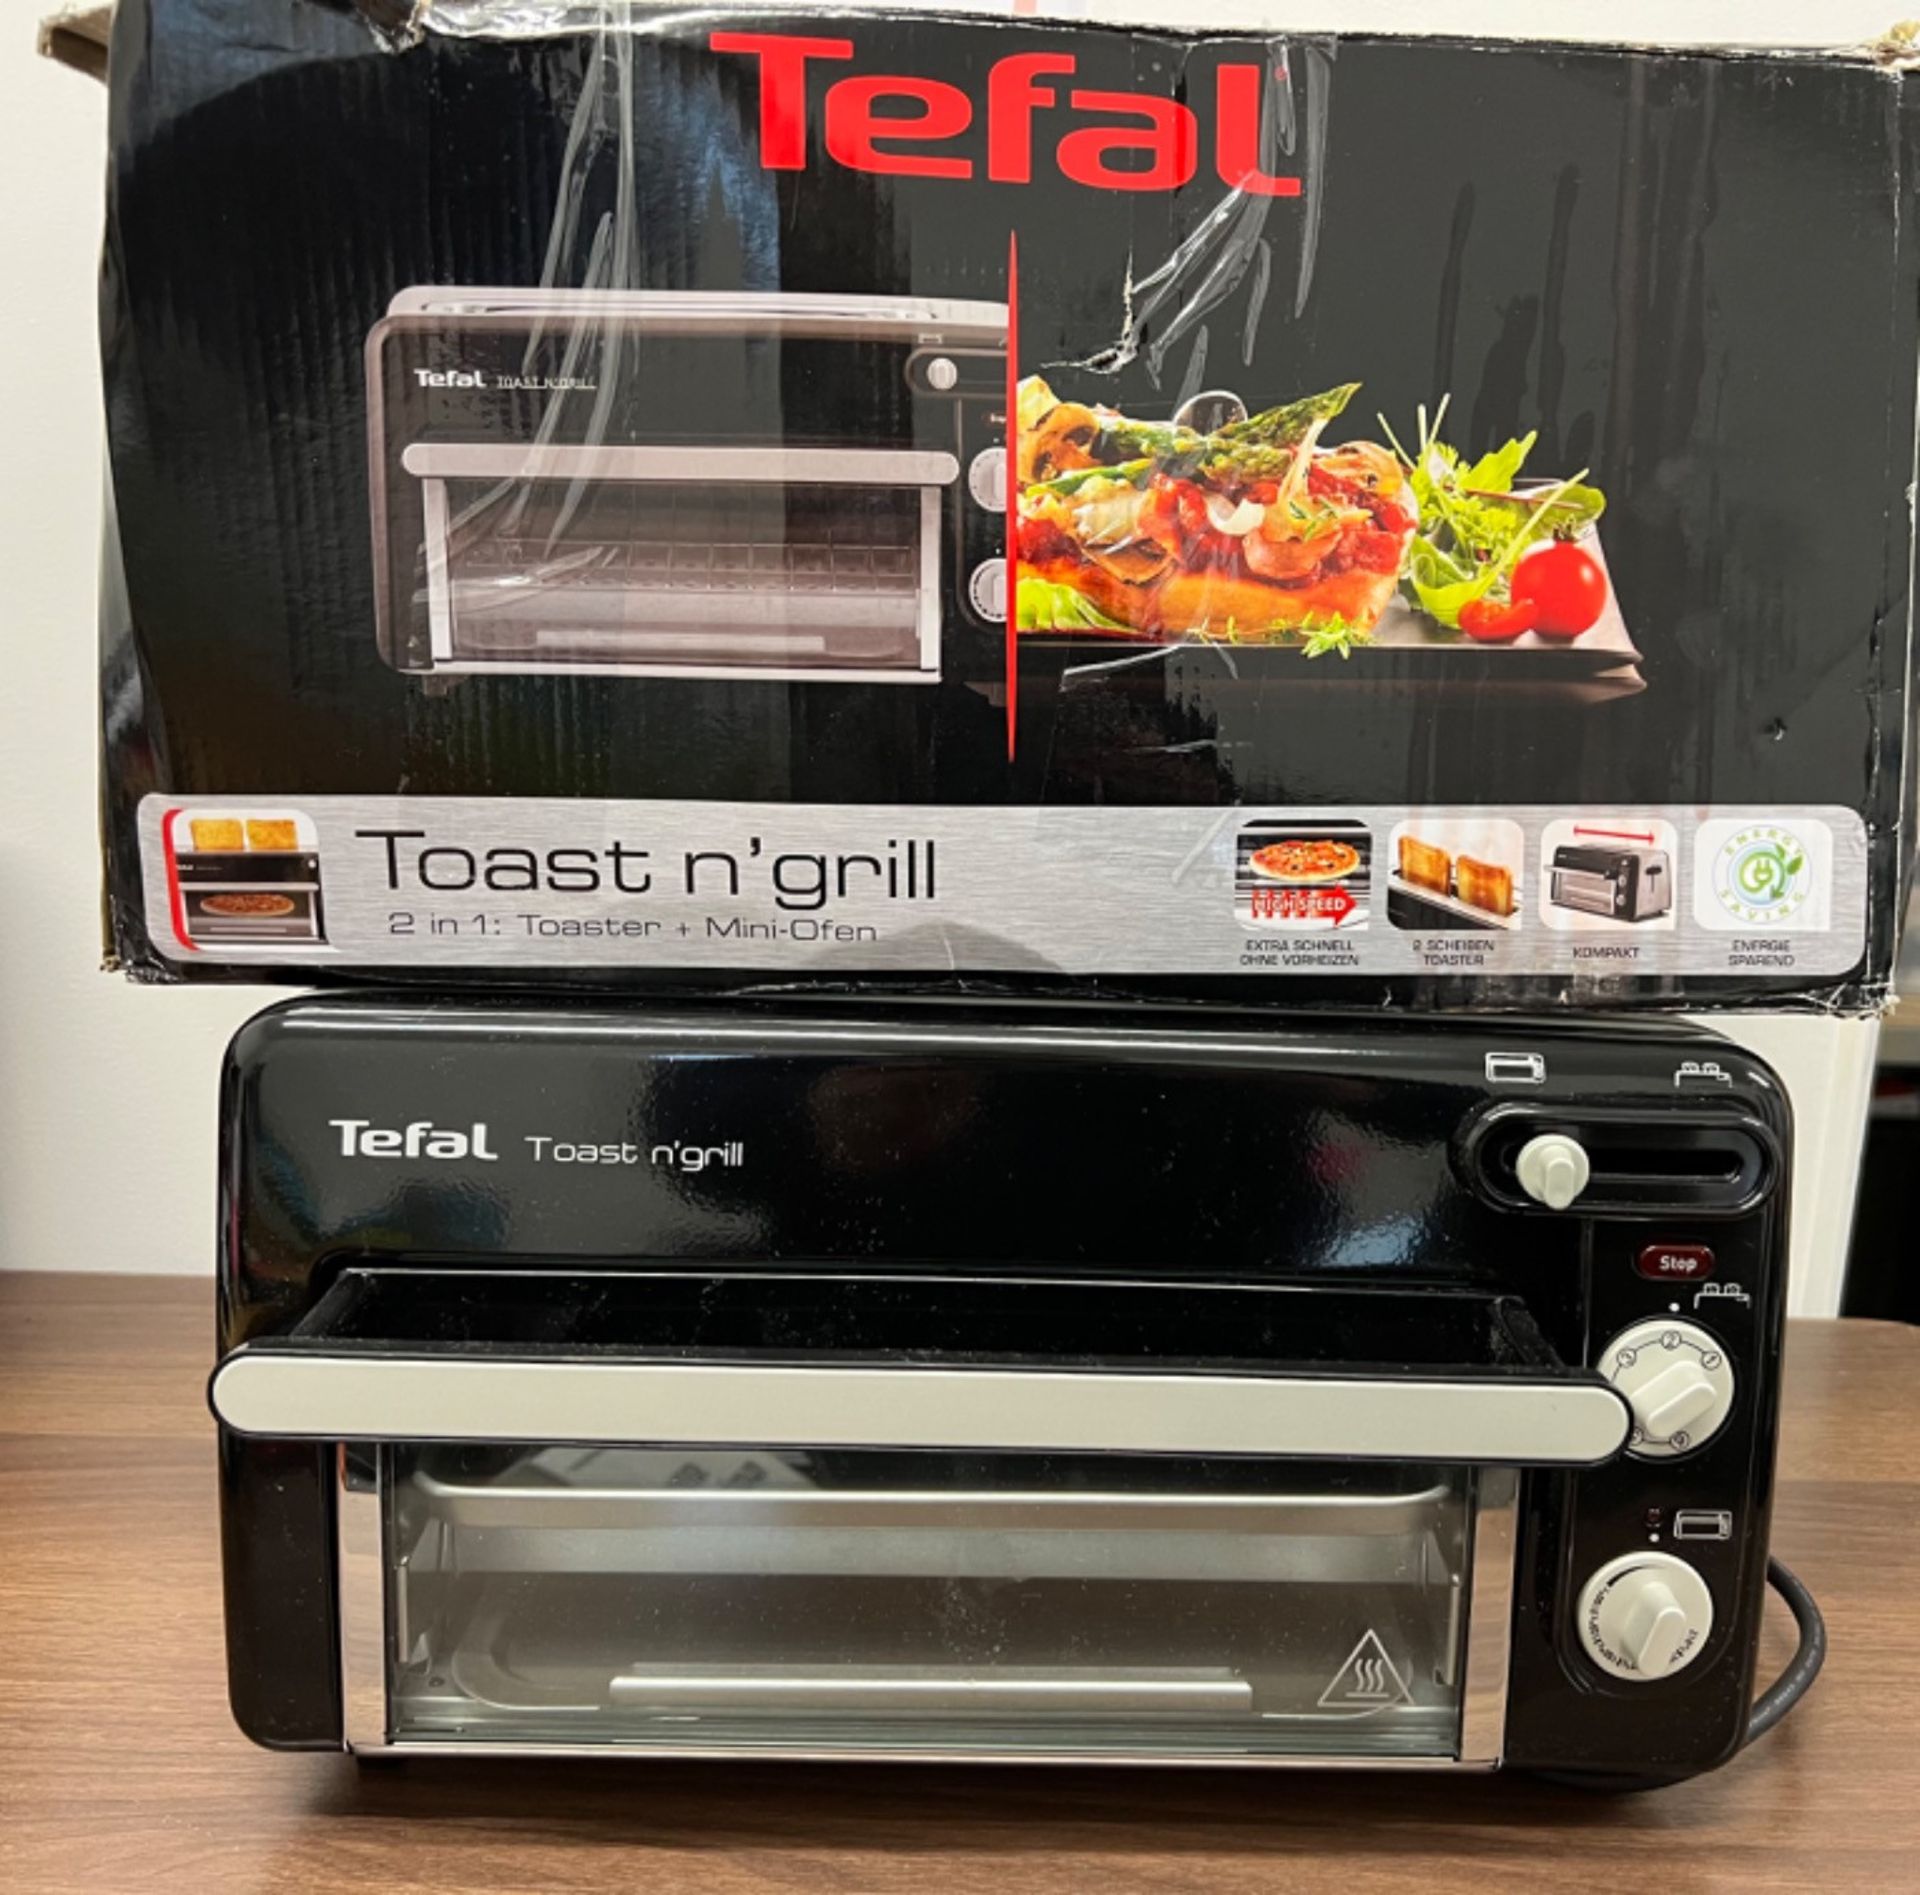 RRP £86.00 Tefal TL 6008 Toast n Grill 2 in 1 Toaster Grill and mini oven for toasting and grilli - Image 2 of 3